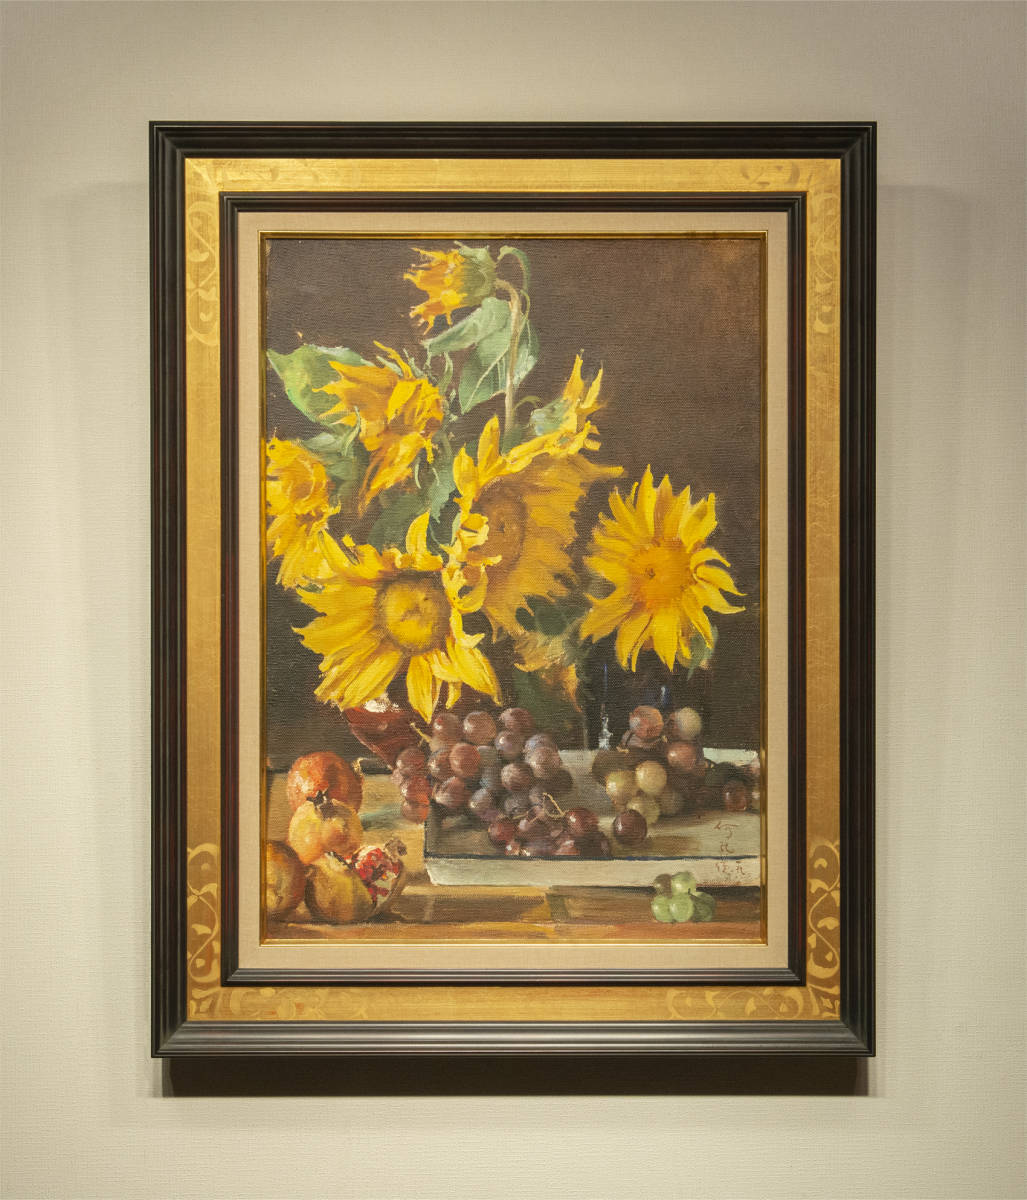 He Kongde 1989 Sunflower, Grape Japanese Stone Oil Painting Framed Authenticity Guaranteed Chinese Painting Modern Art, painting, oil painting, still life painting